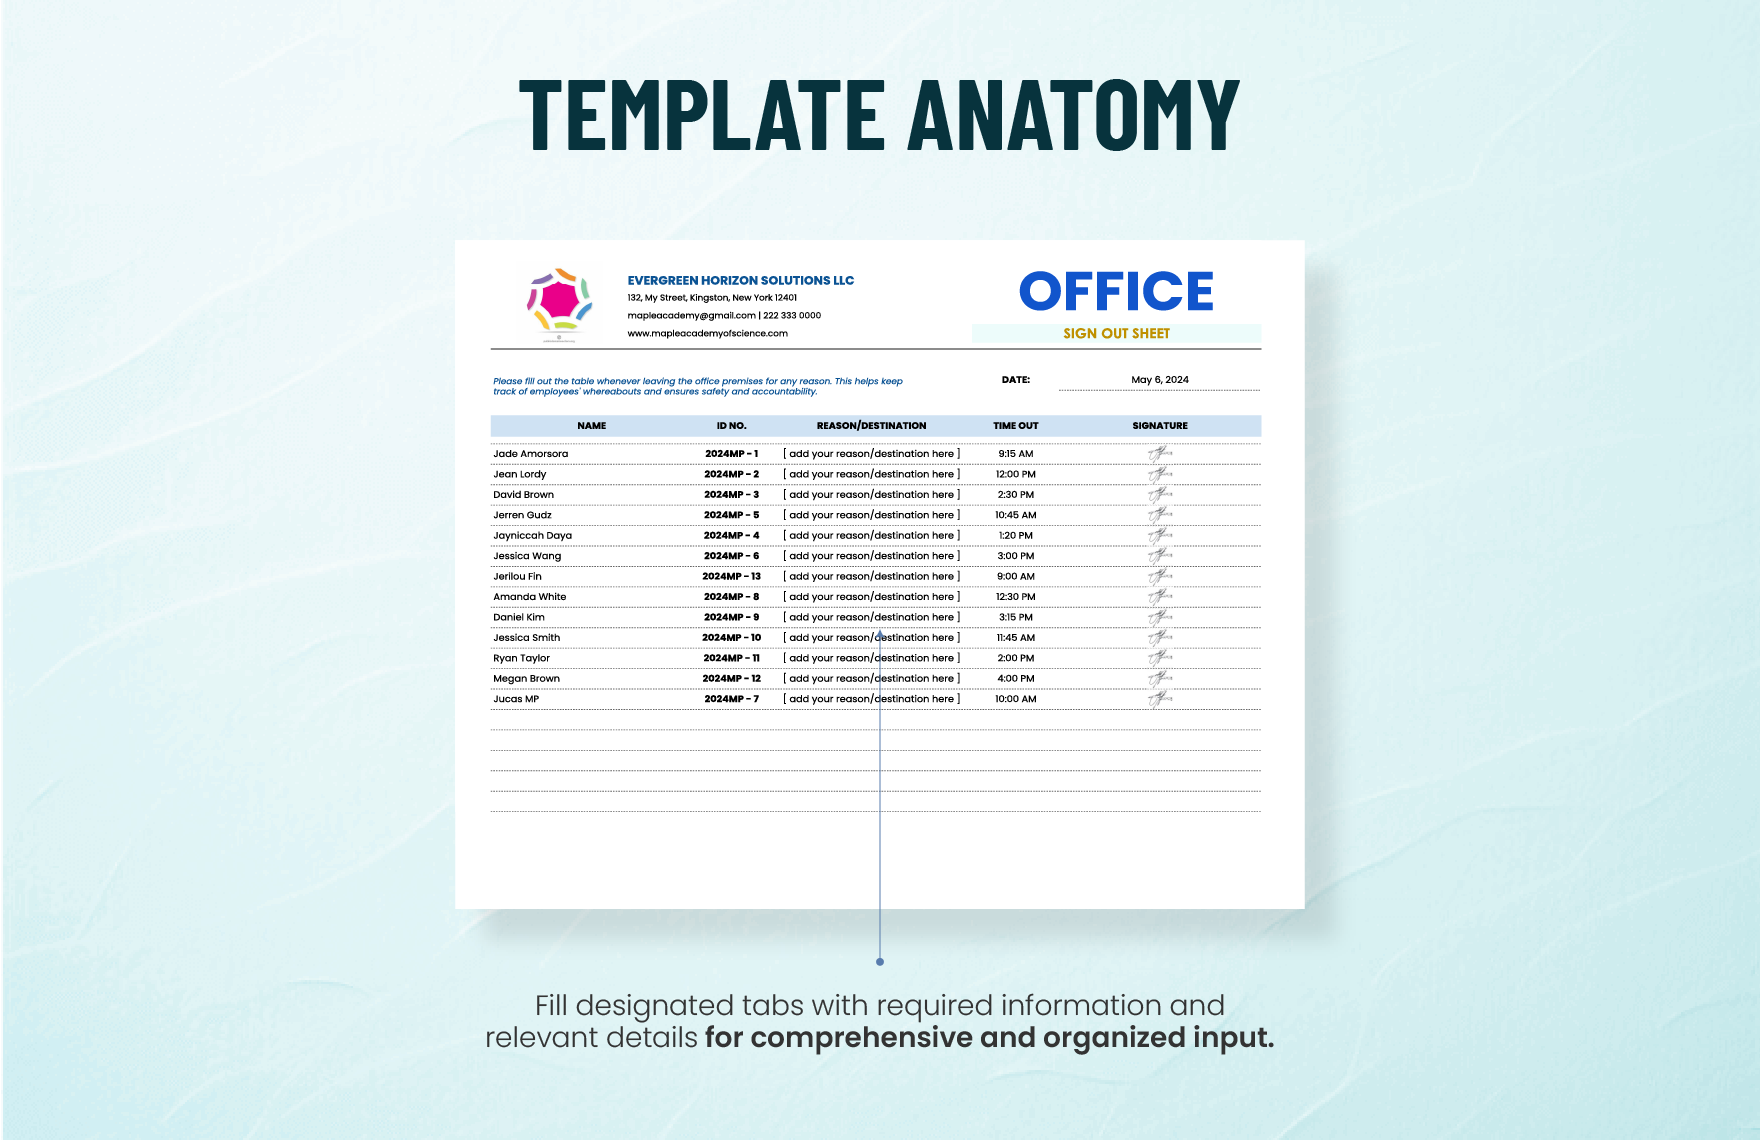 Office Sign Out Sheet Template